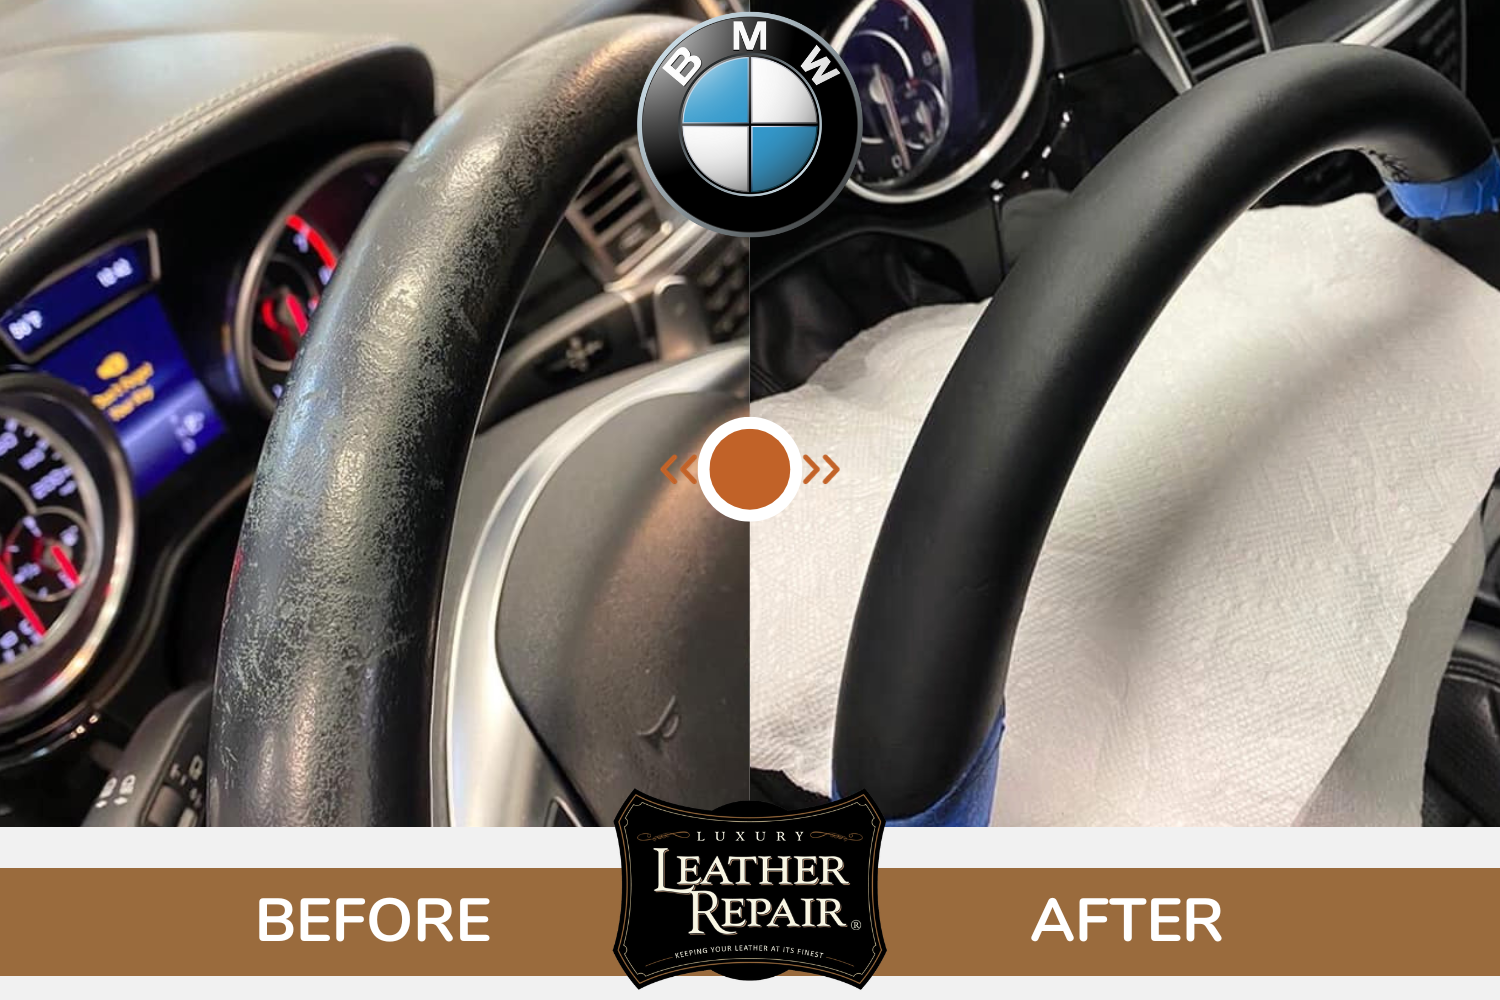 BMW Leather dye Colourant full Car interior repair re-colouring sealer kit.  - The Leather Colour Doctor